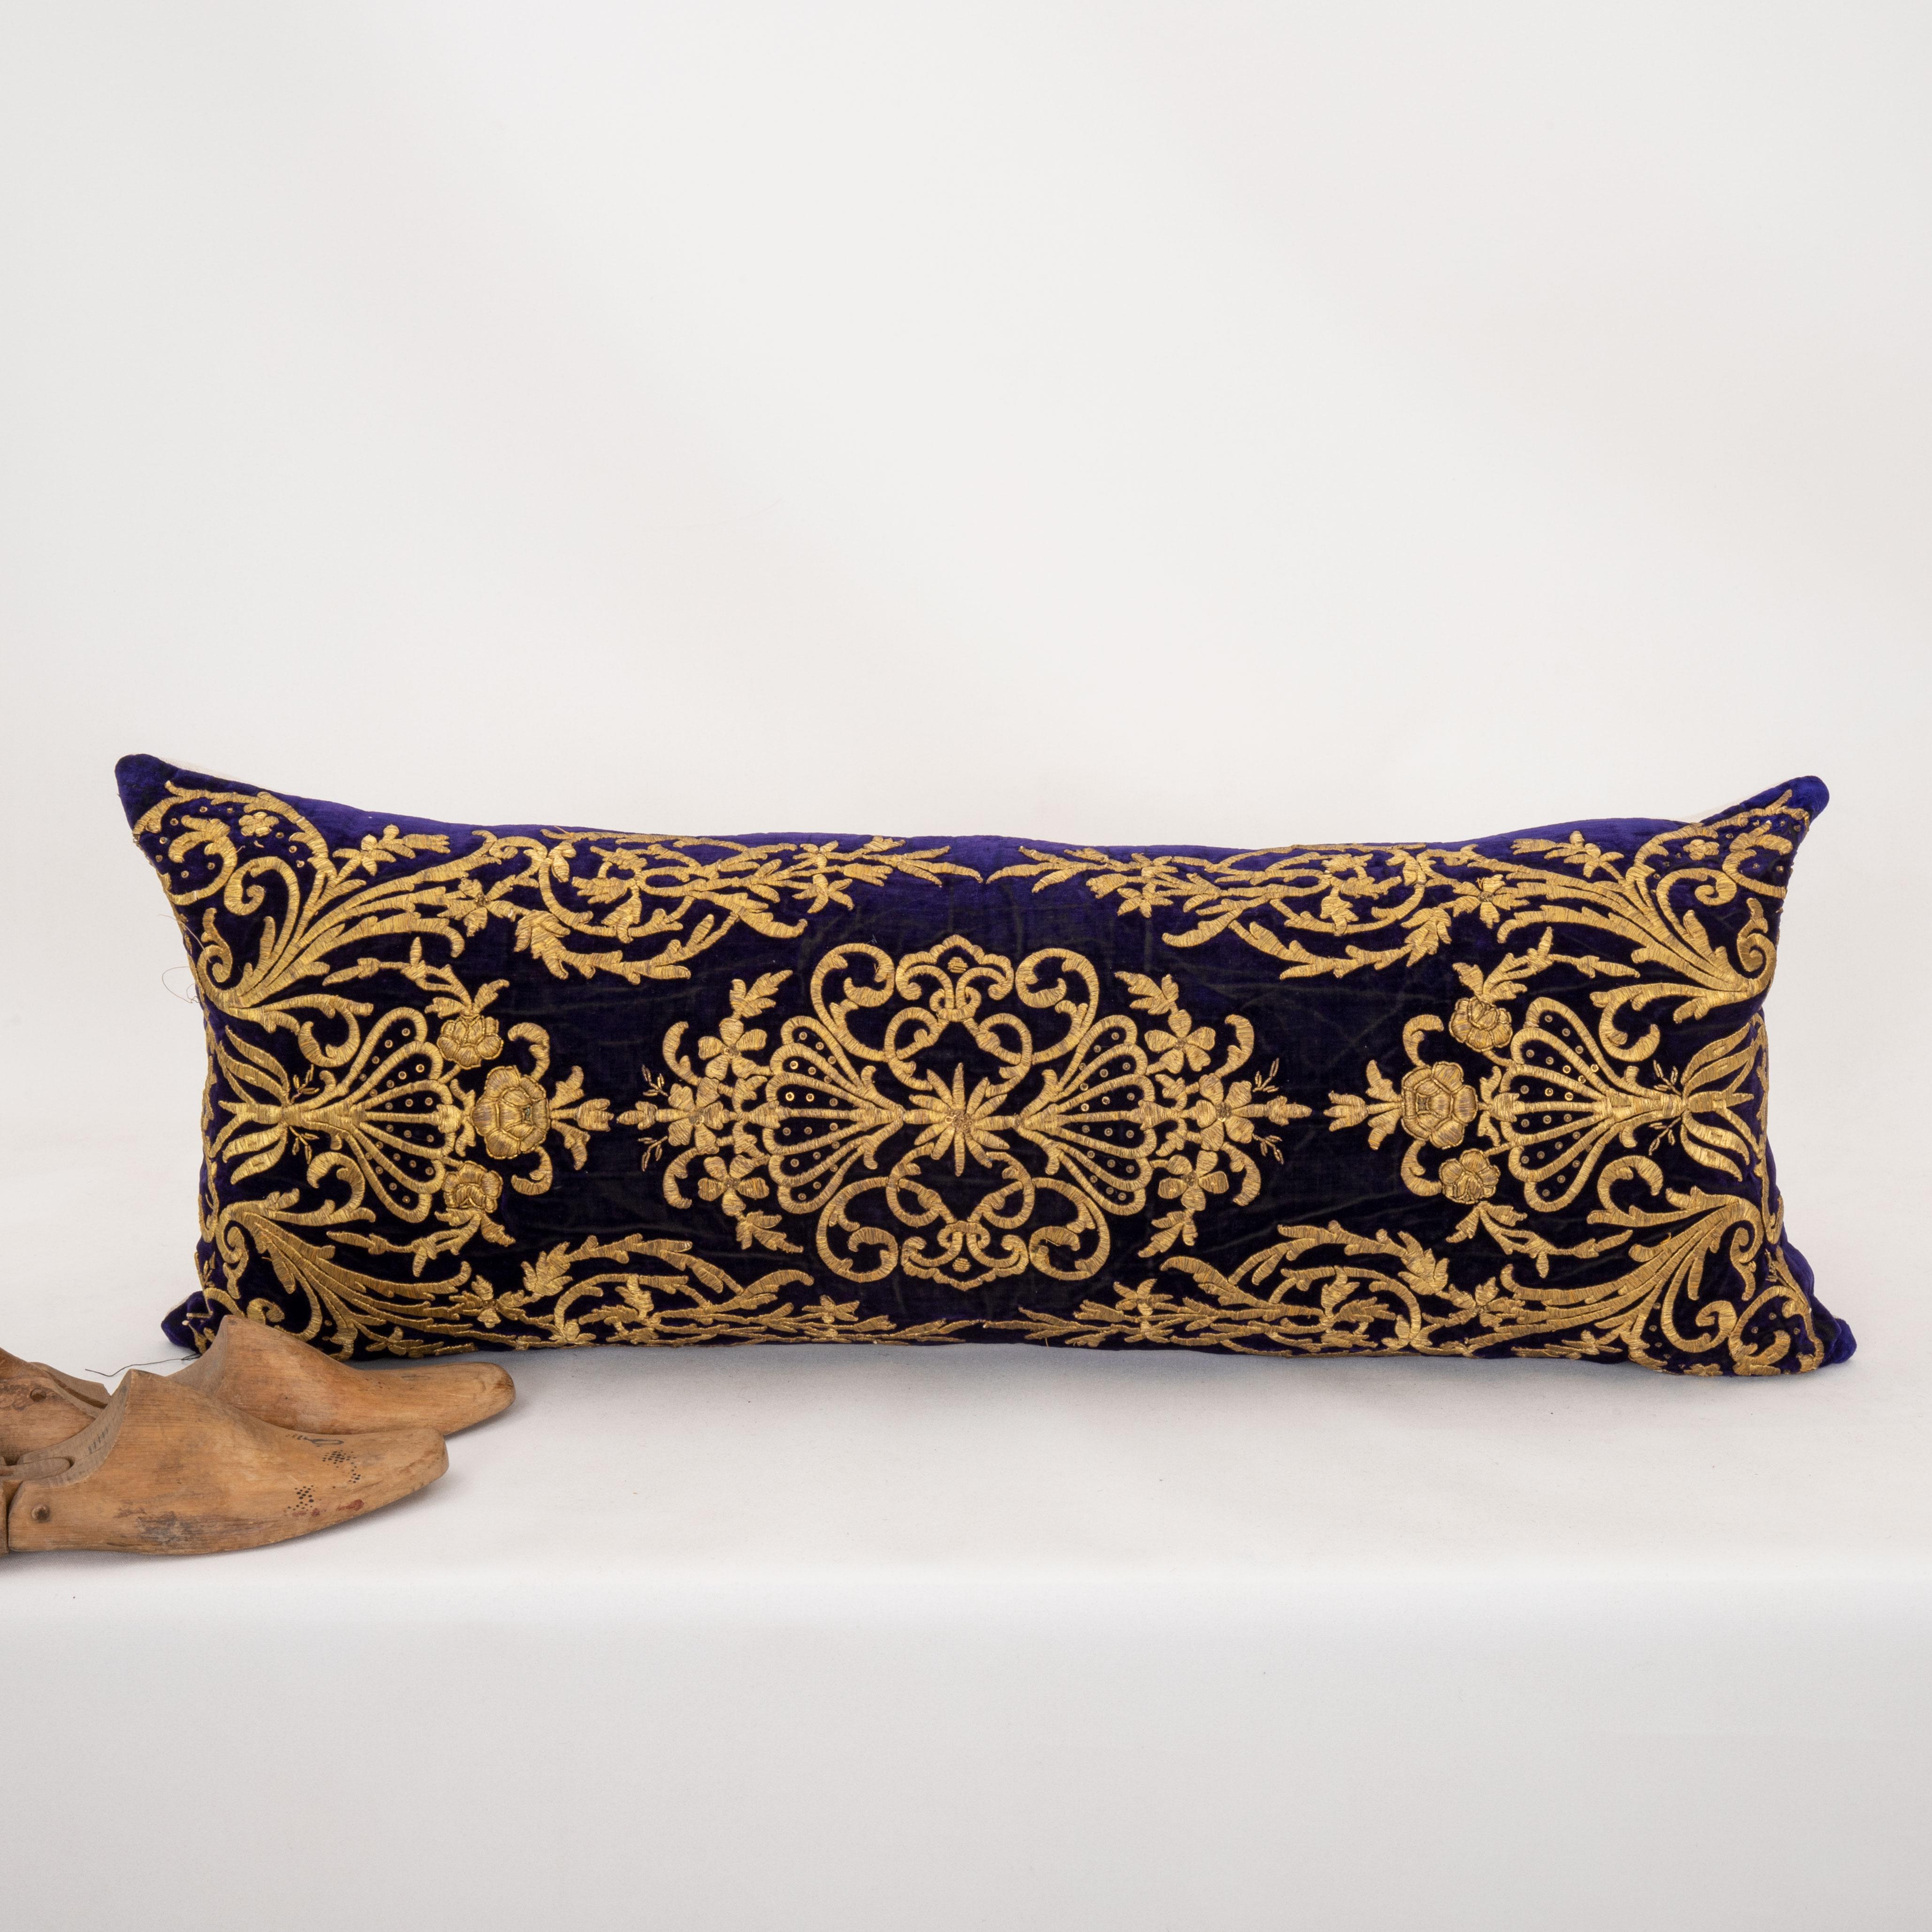 Silk Ottoman / Turkish Pillow Cover in Sarma Technique, late 19th / Early 20th C. For Sale